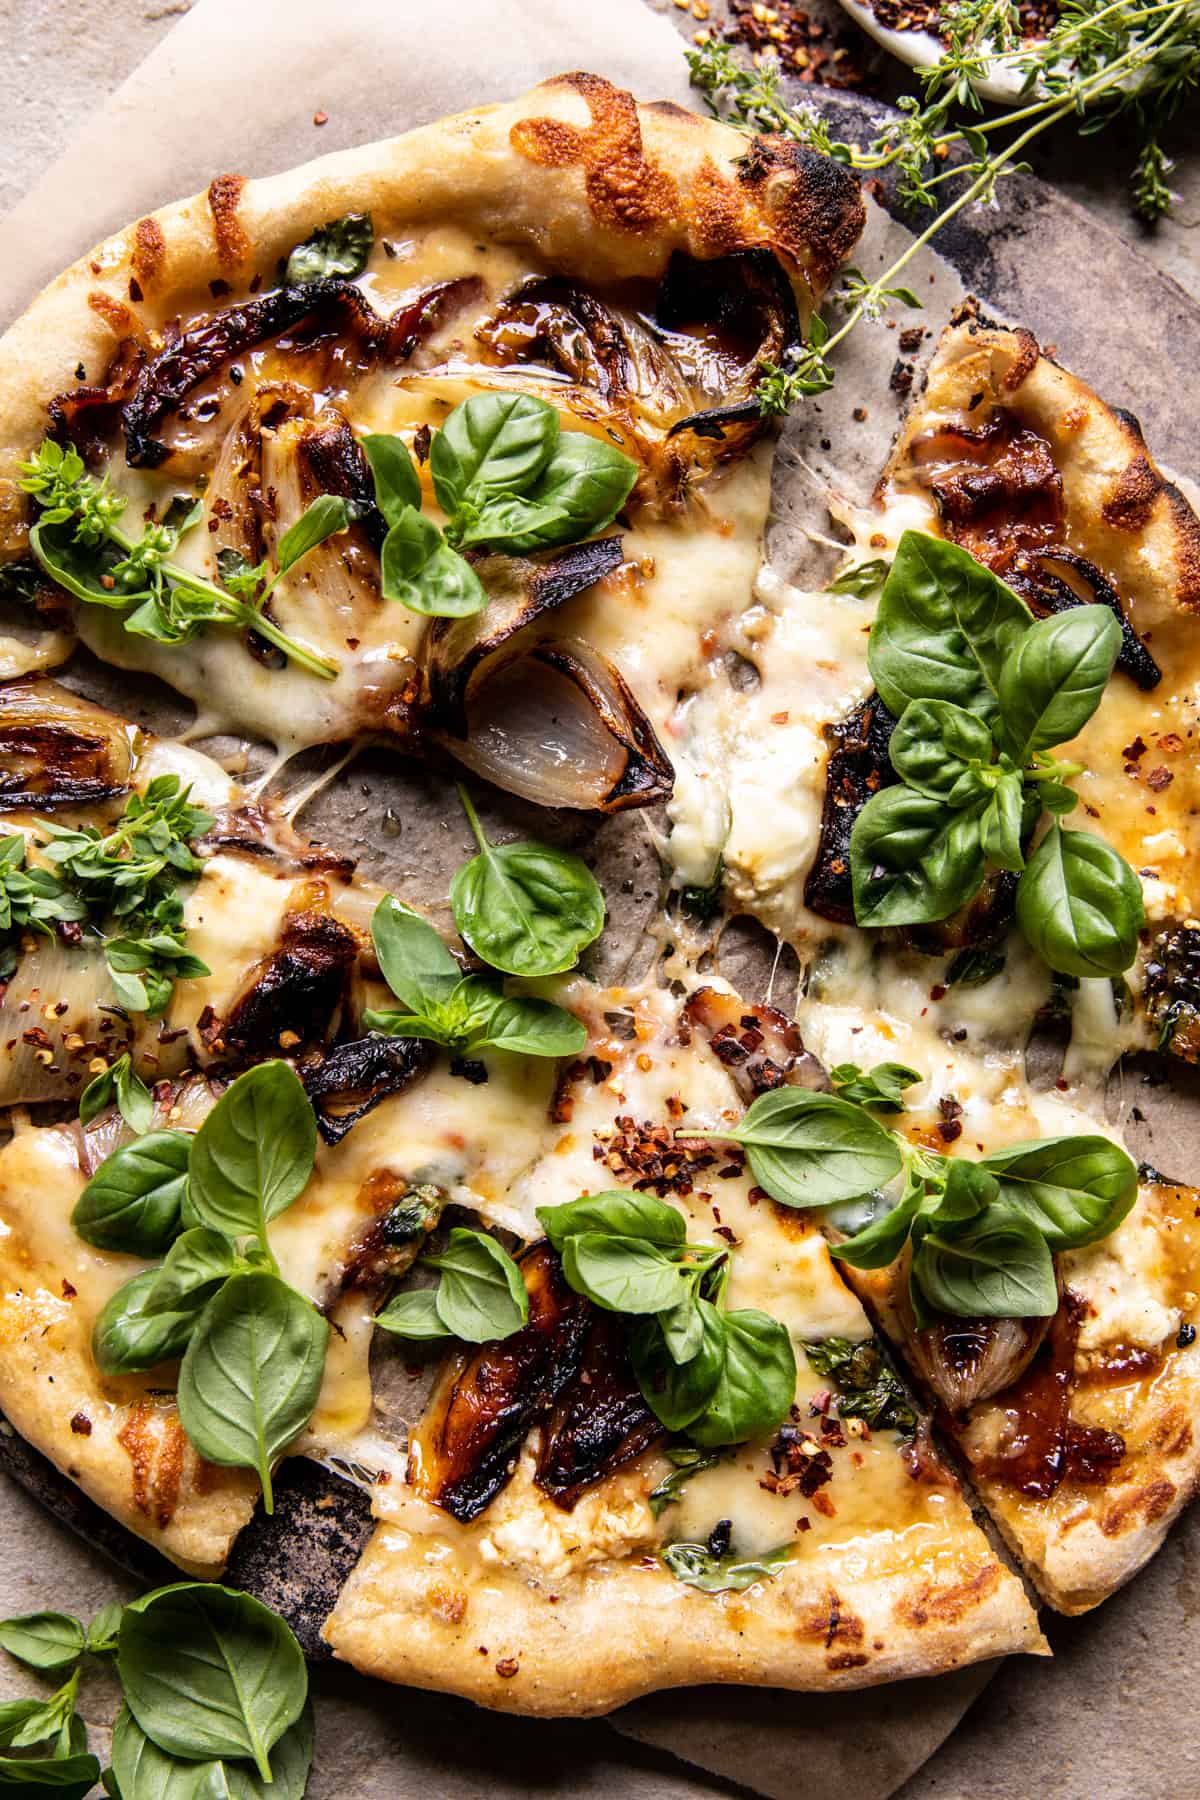 Caramelized Shallot and Bacon Goat Cheese Pizza | halfbakedharvest.com